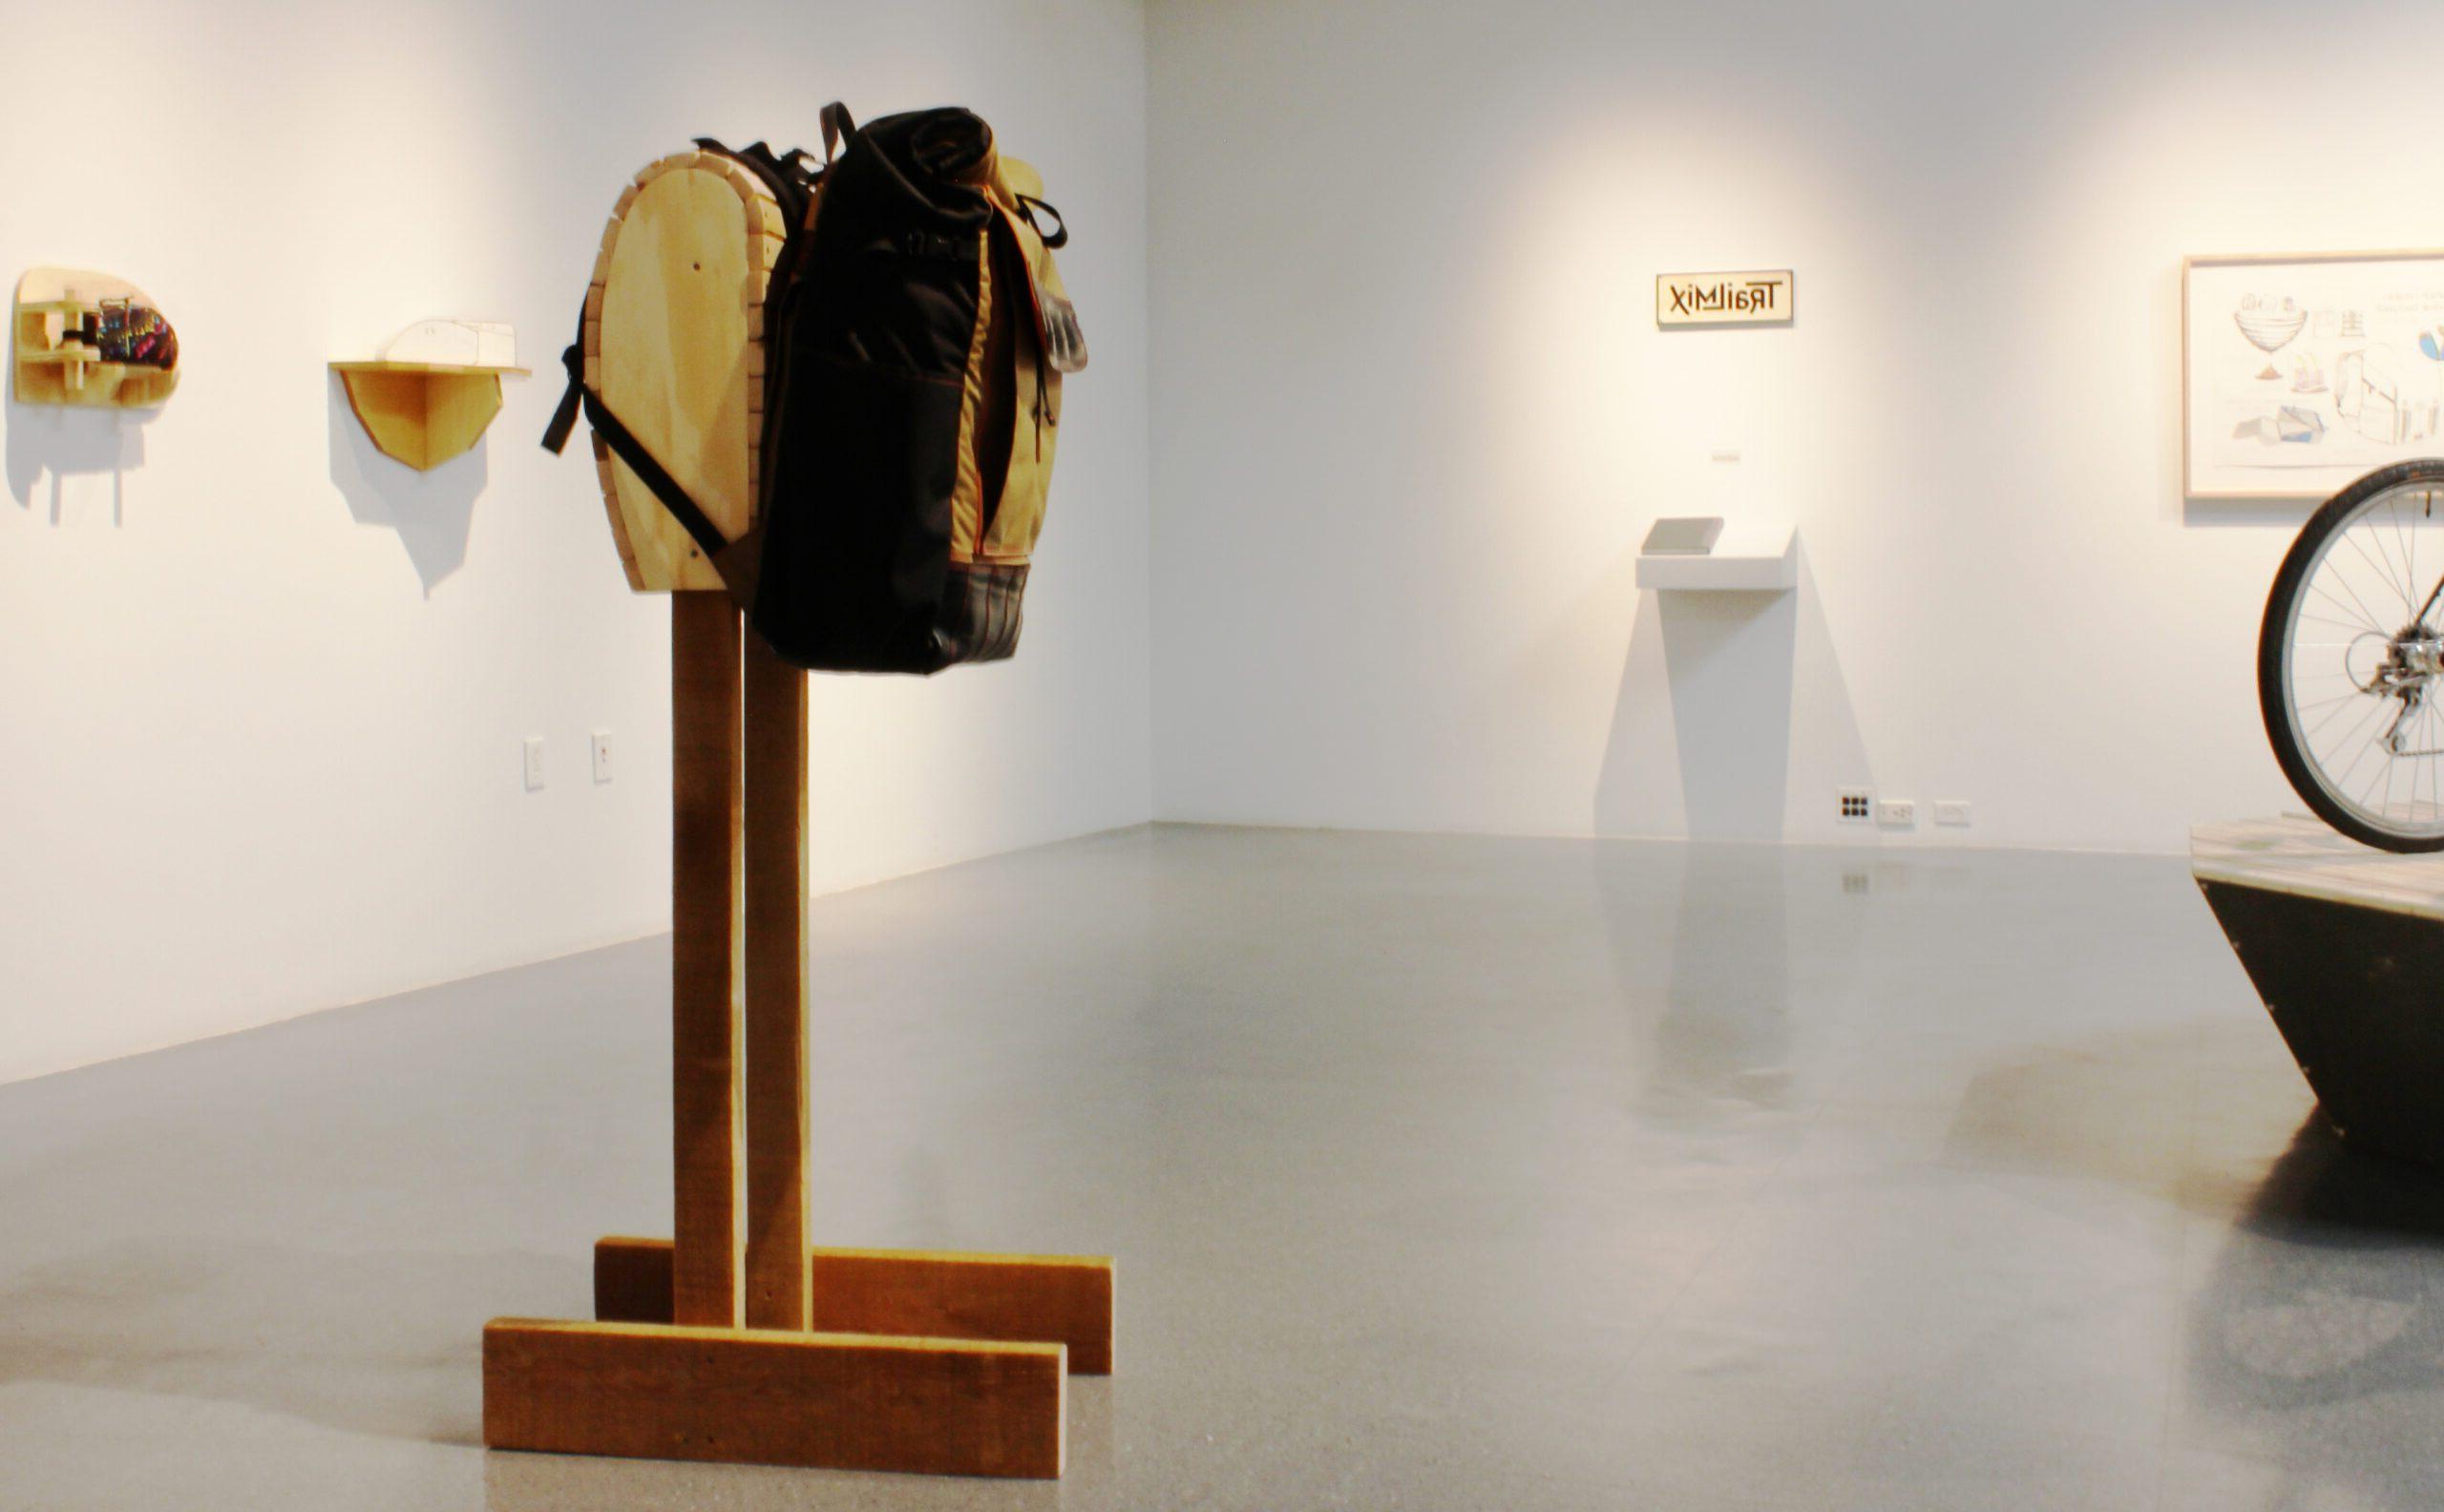 Gallery space with tall ceilings, handmade backpack on a wooden display.